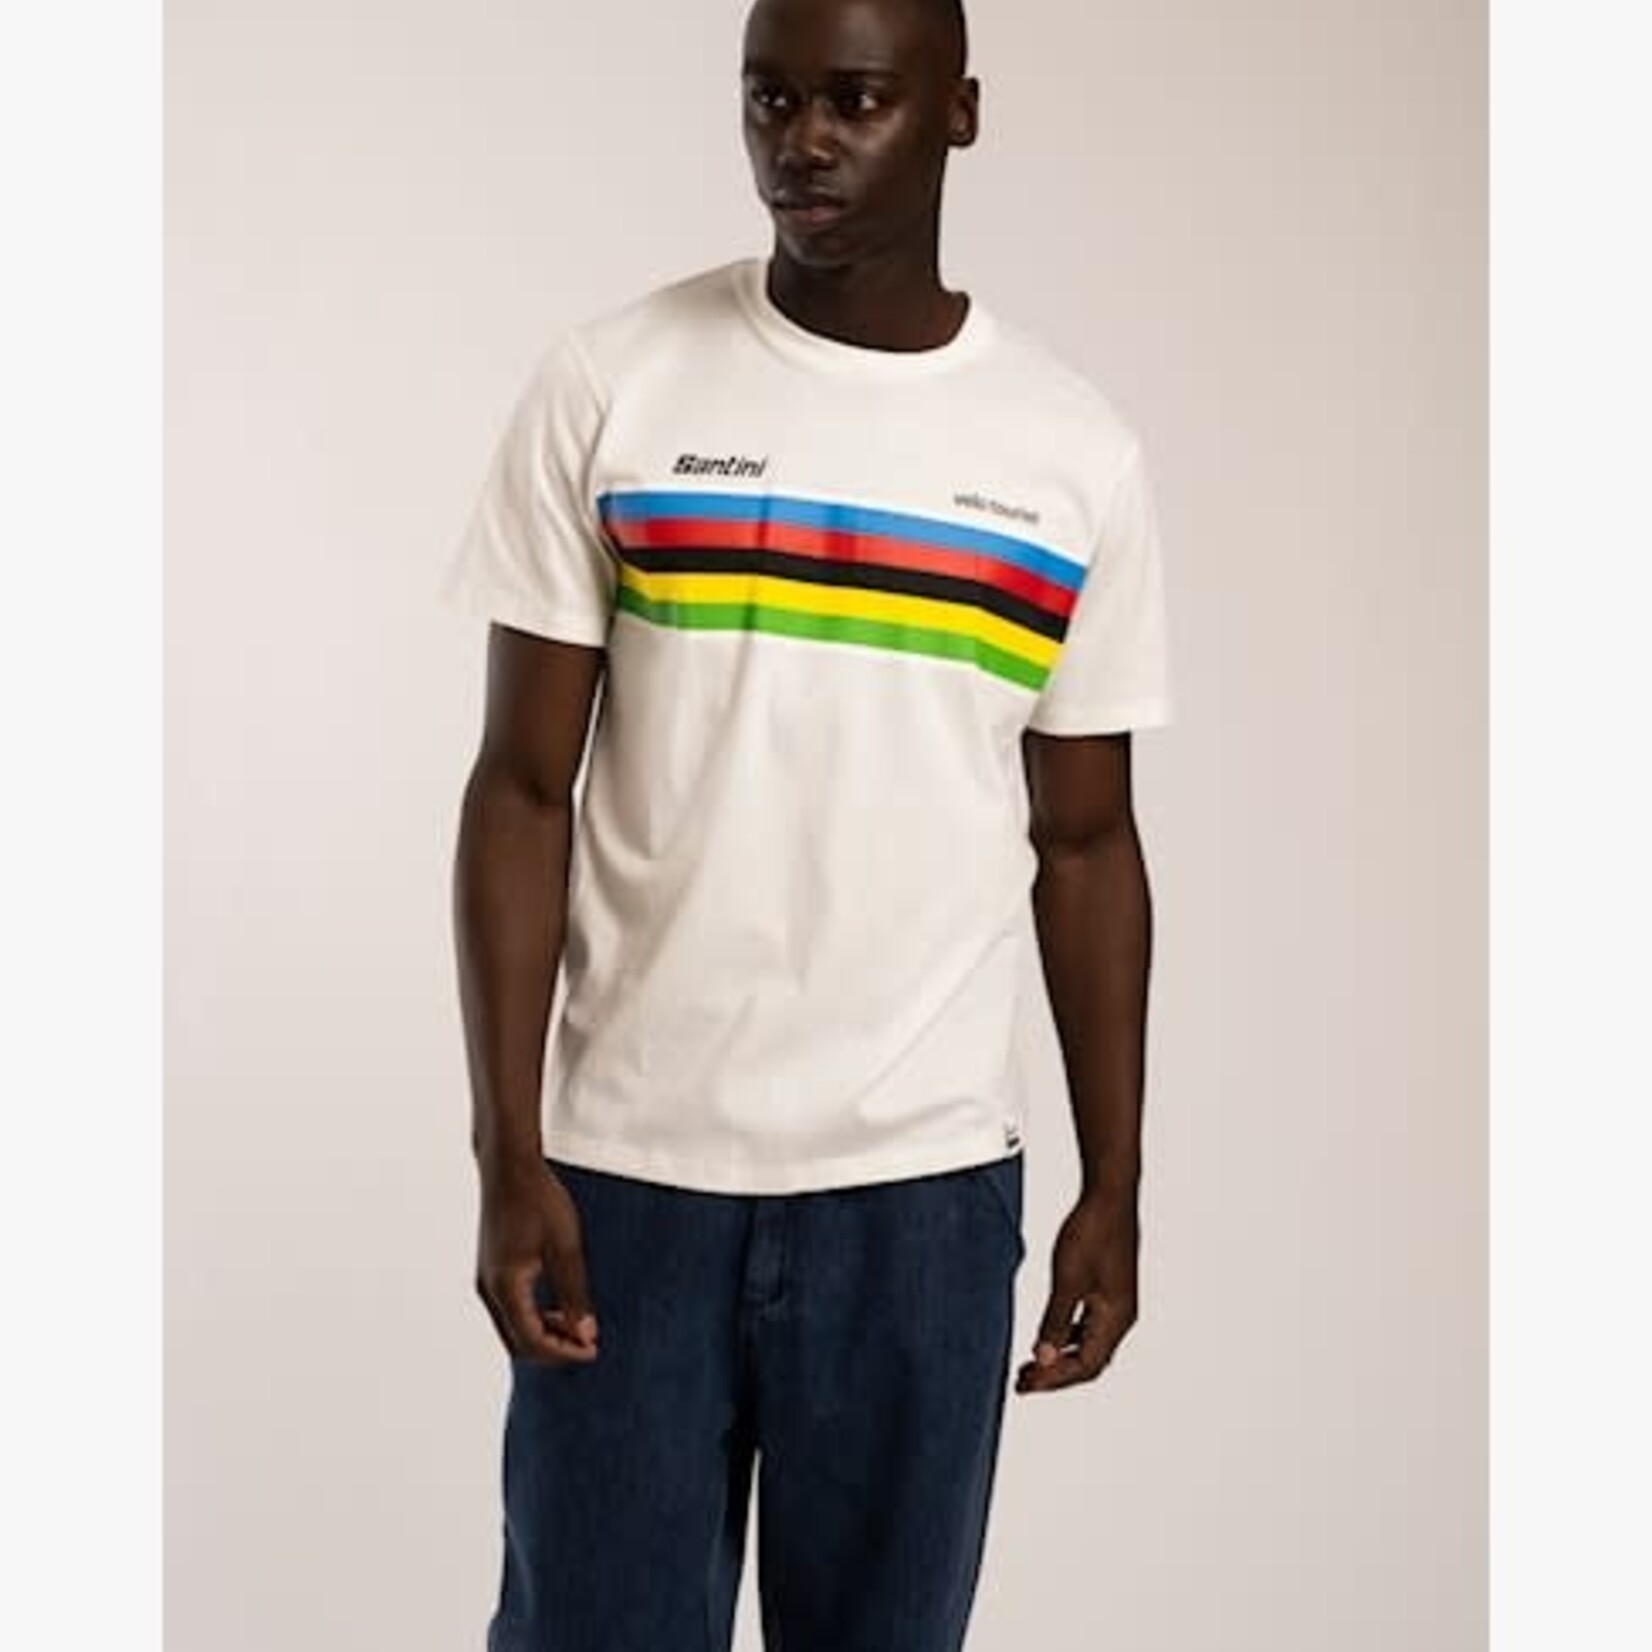 ANTWRP ANTWRP UCI STRIPES T-SHIRT - REGULAR FIT OFF WHITE